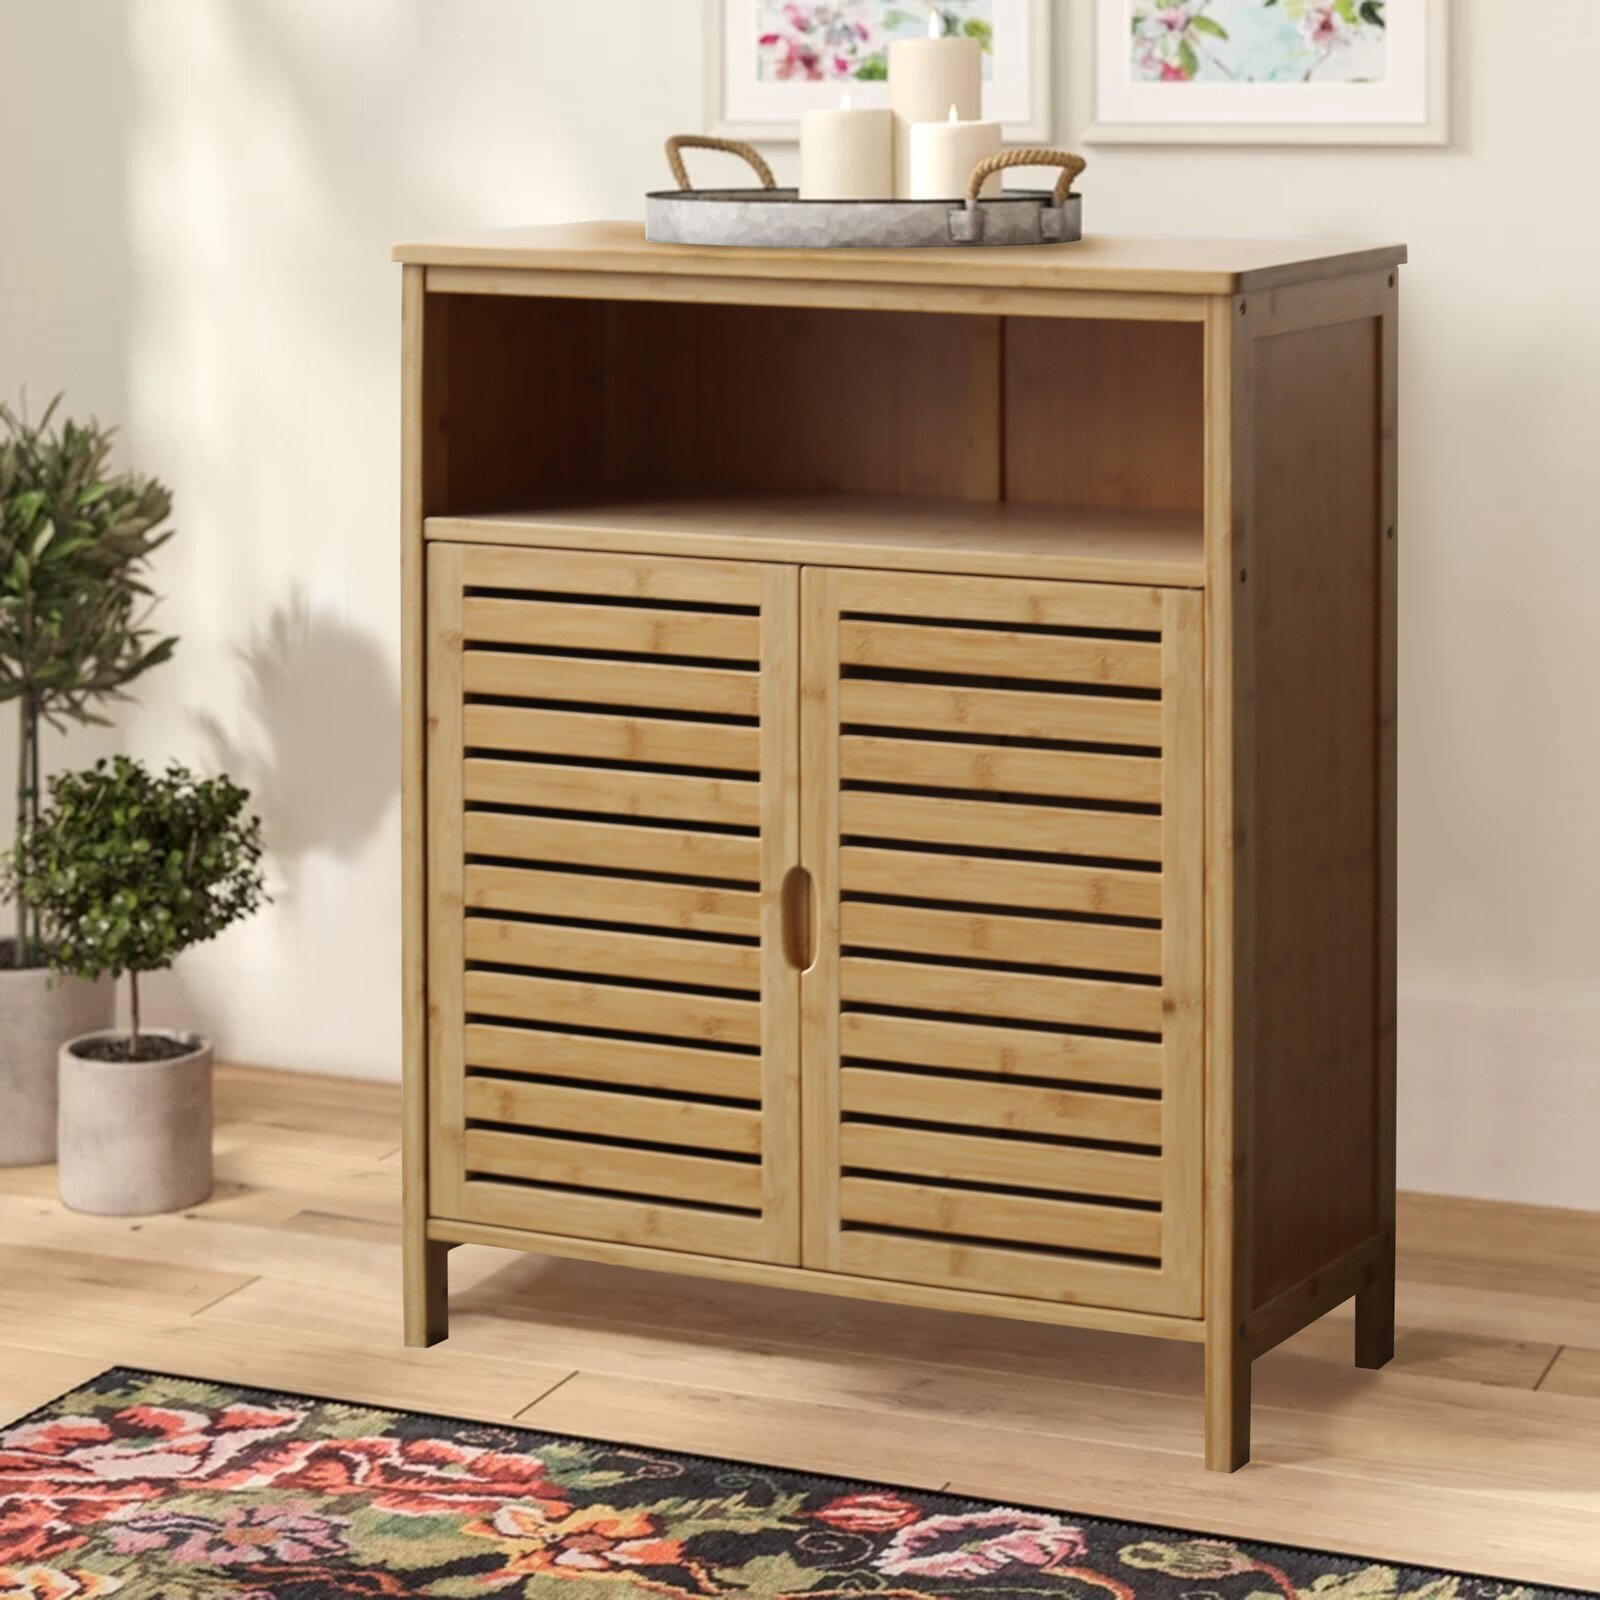 Wood linen cabinet with useable counter space